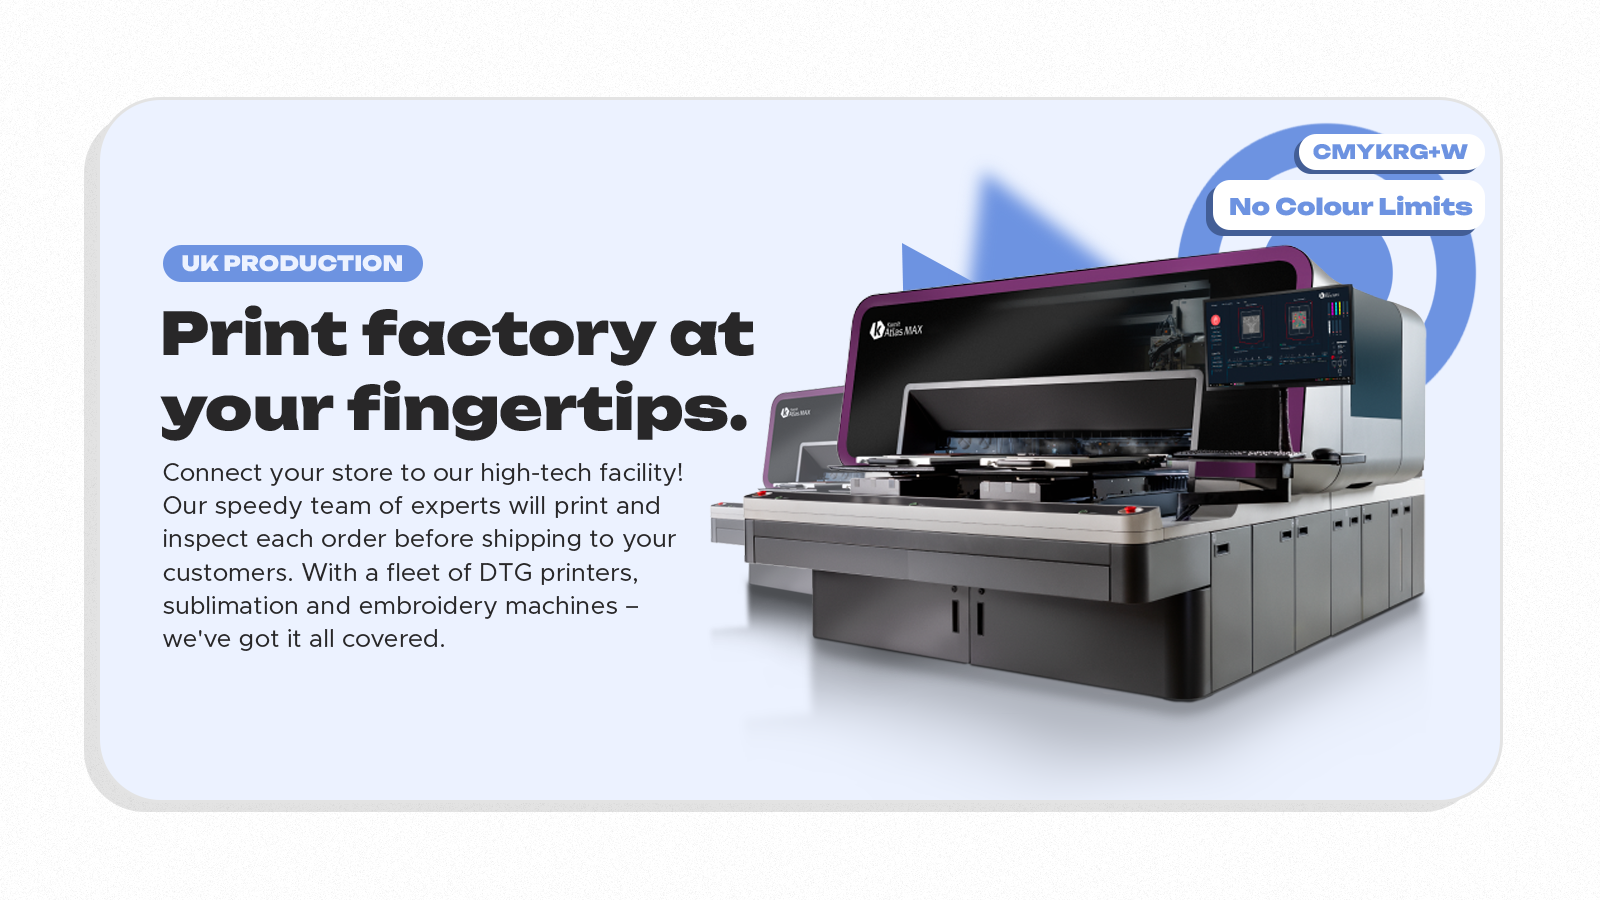 UK Production. Print factory at your fingertips.